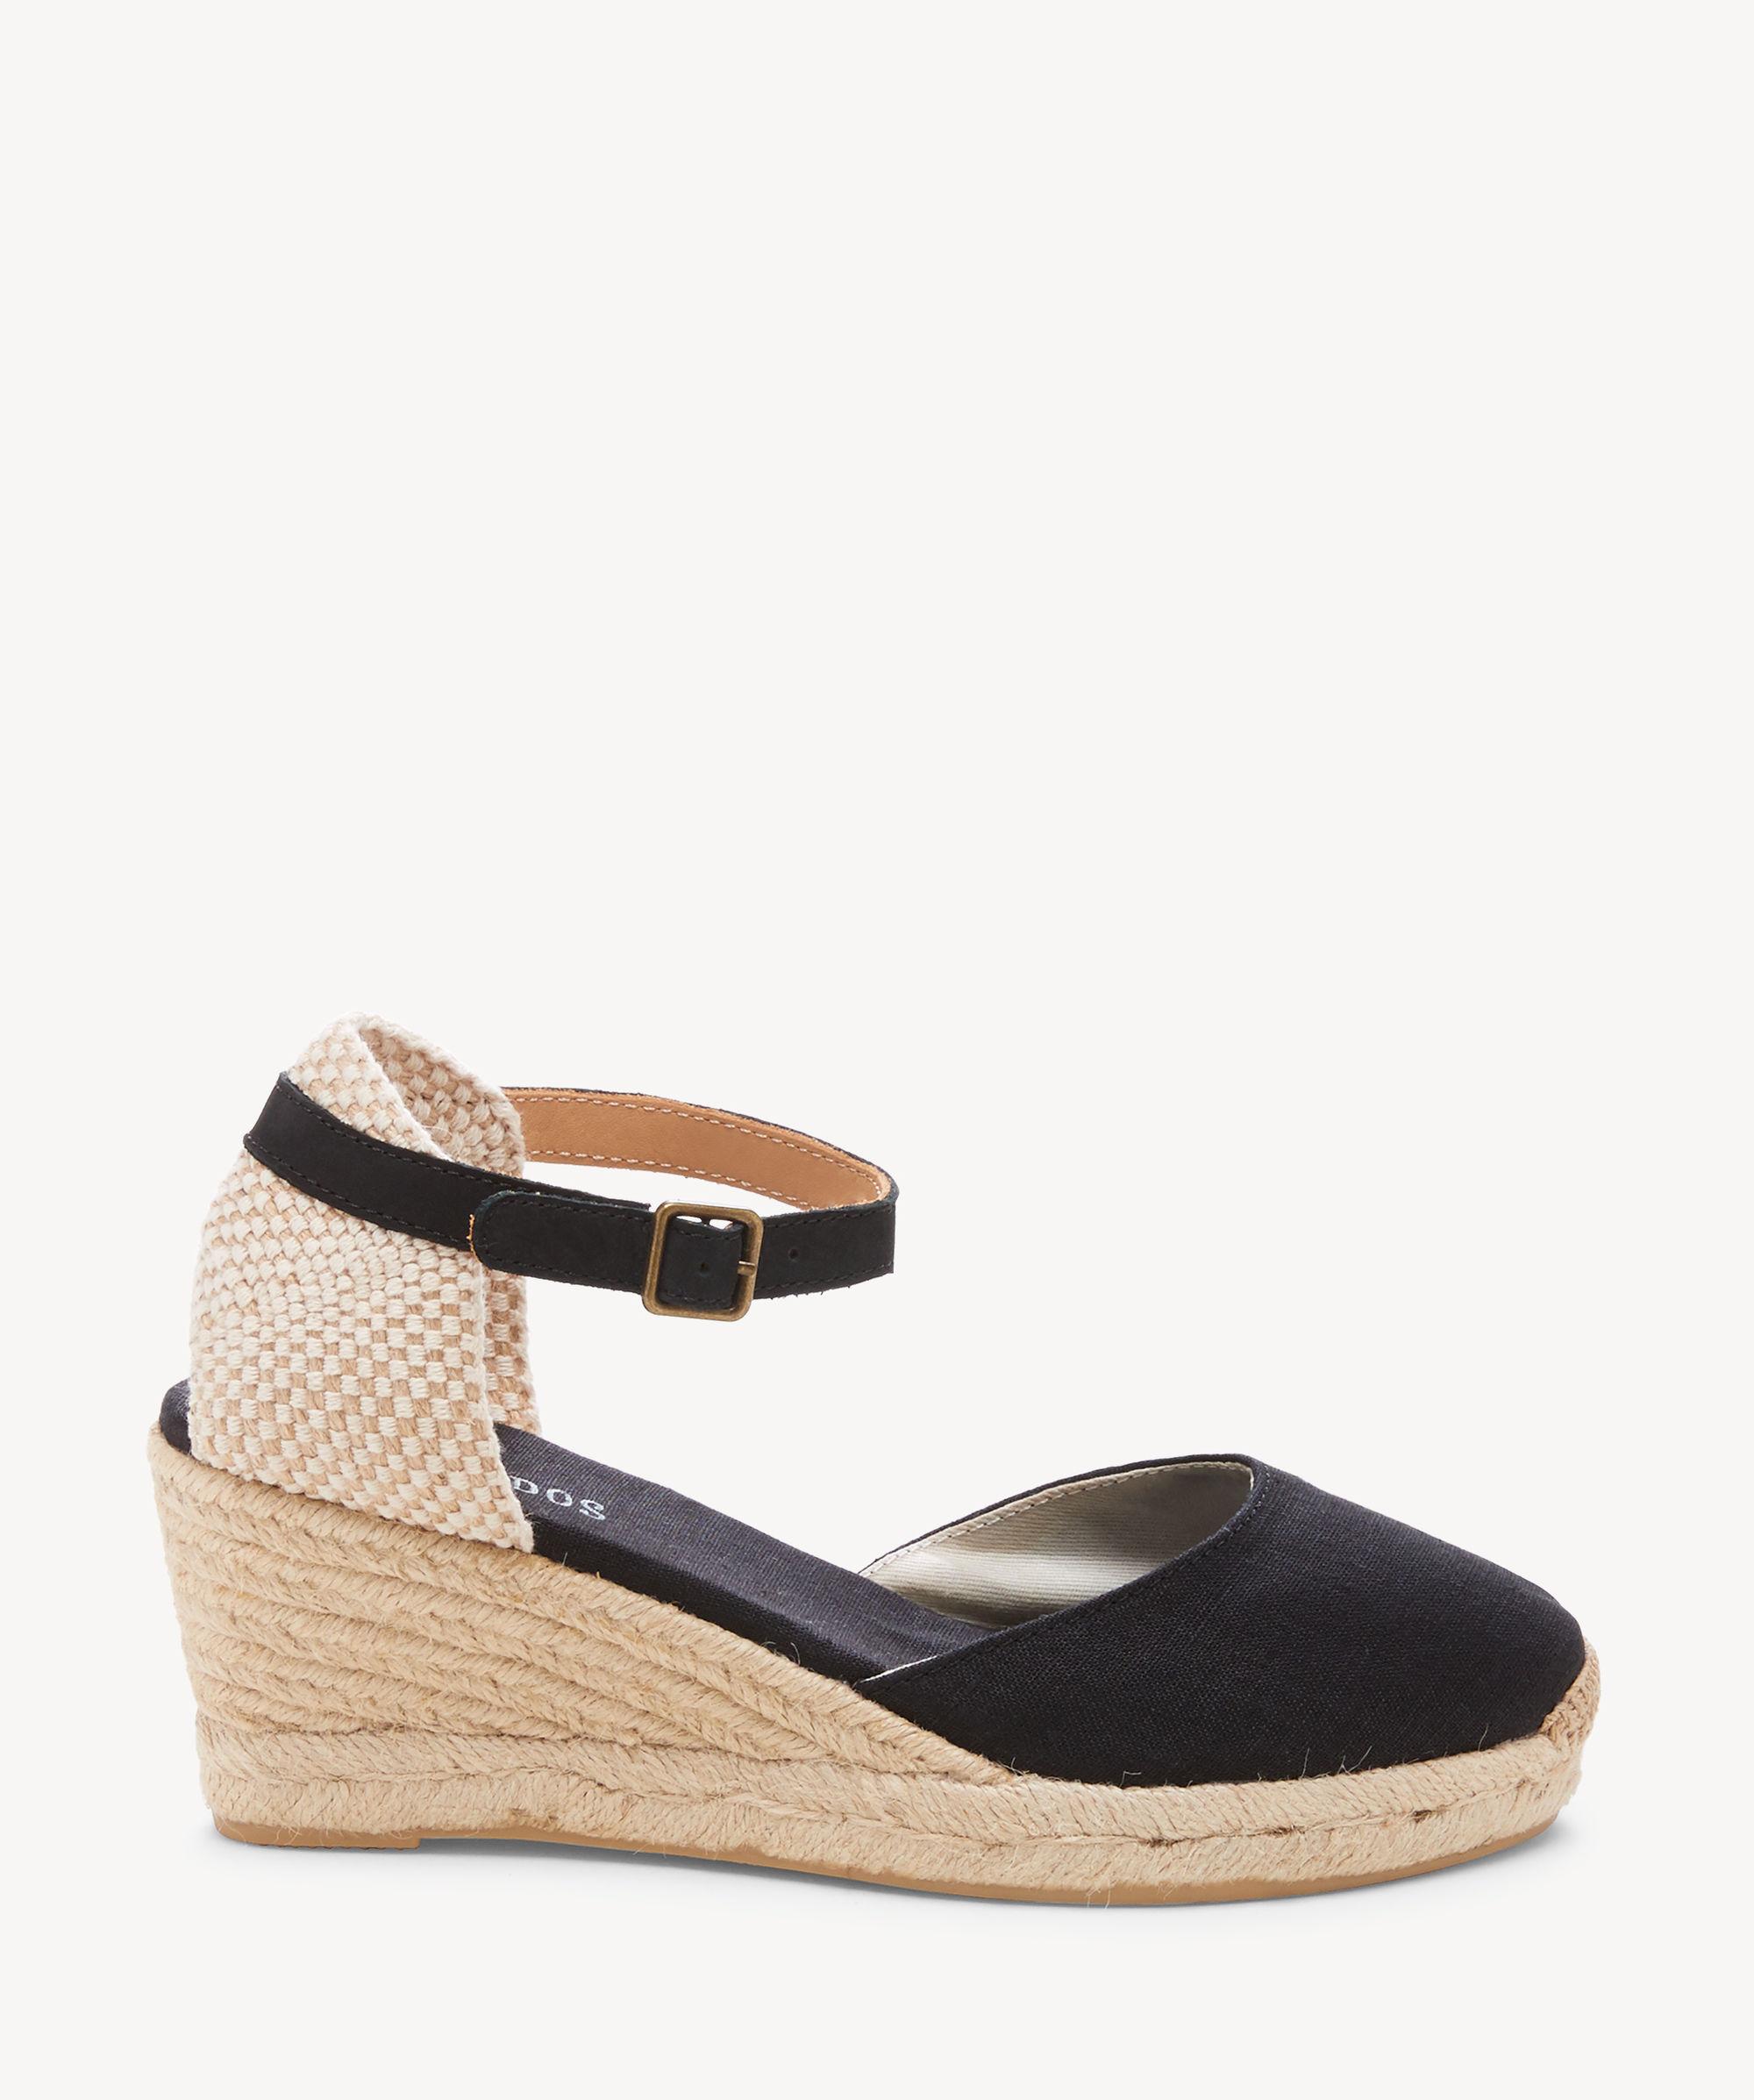 Soludos Linen Closed Toe Midwedge Espadrille Wedge in Black - Lyst